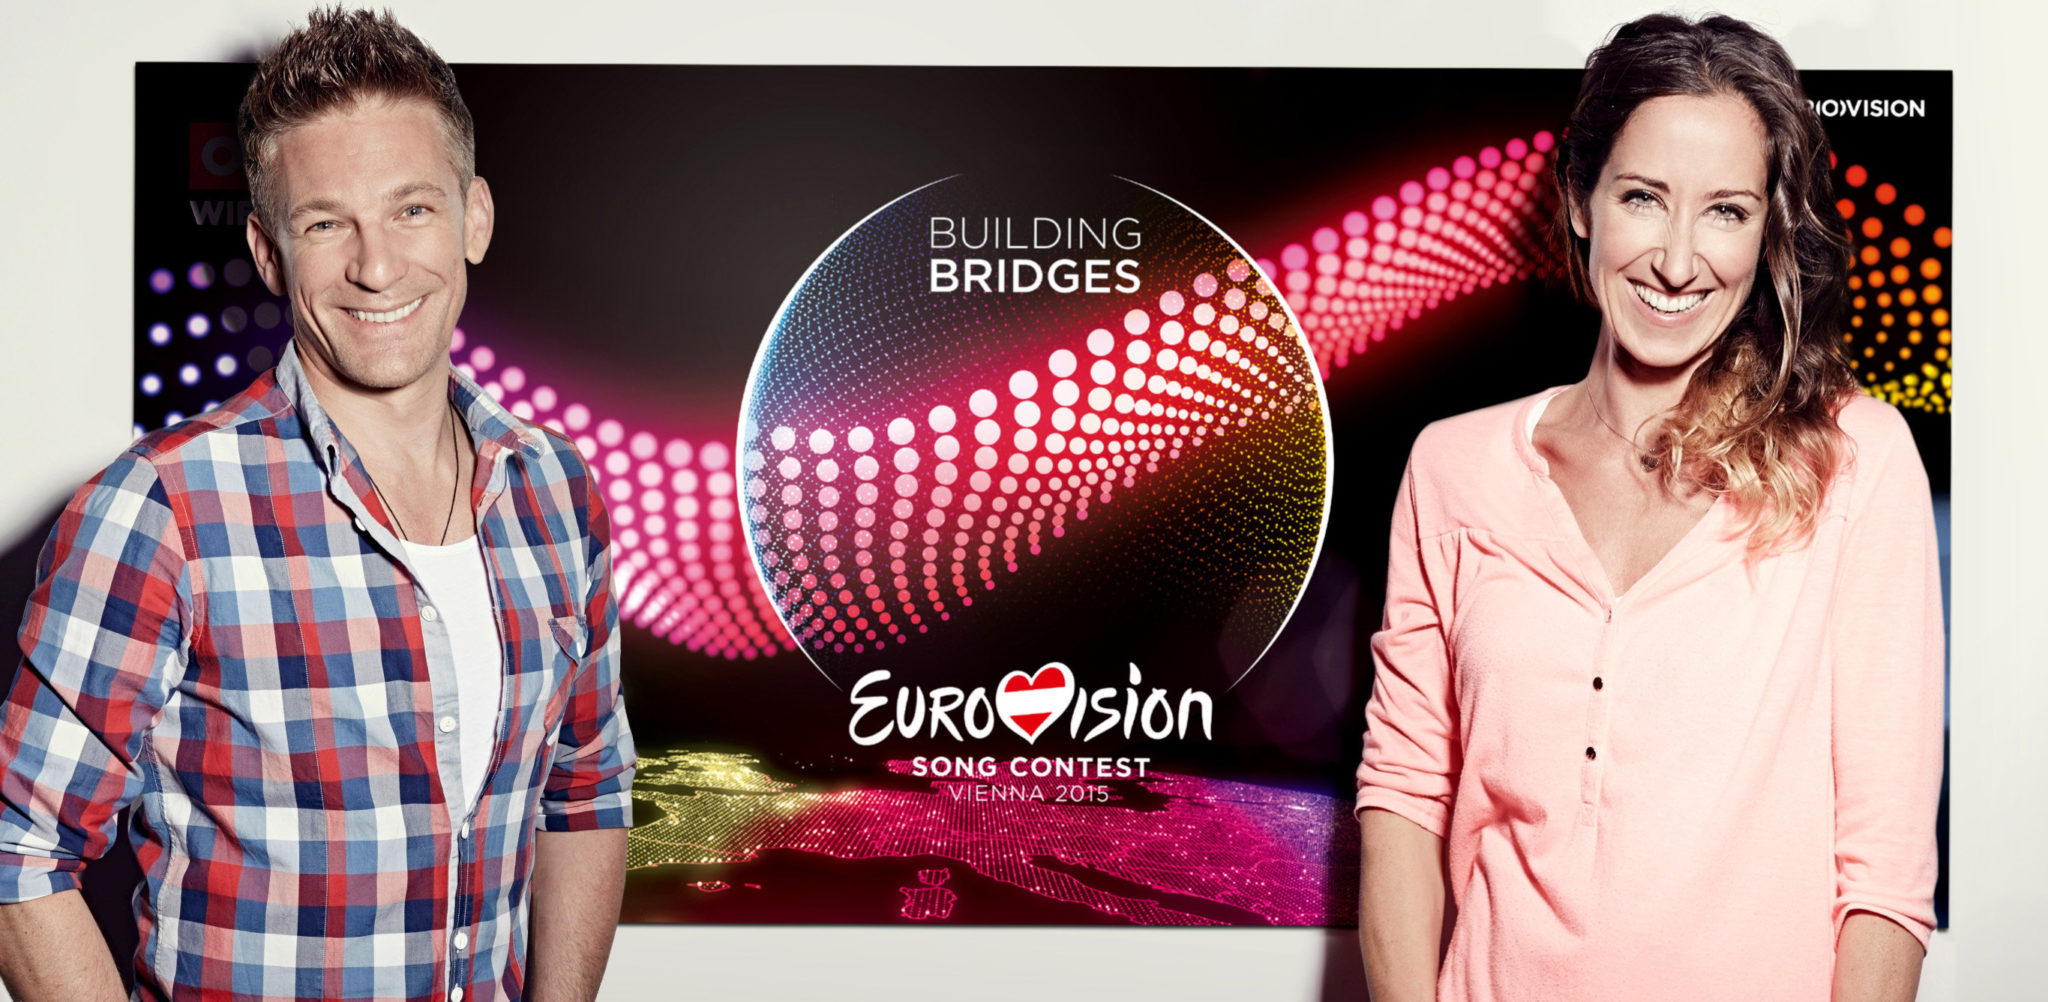 Kati Bellowitsch and Andi Knoll to host Eurovision 2015 Semi Final Allocation Draw